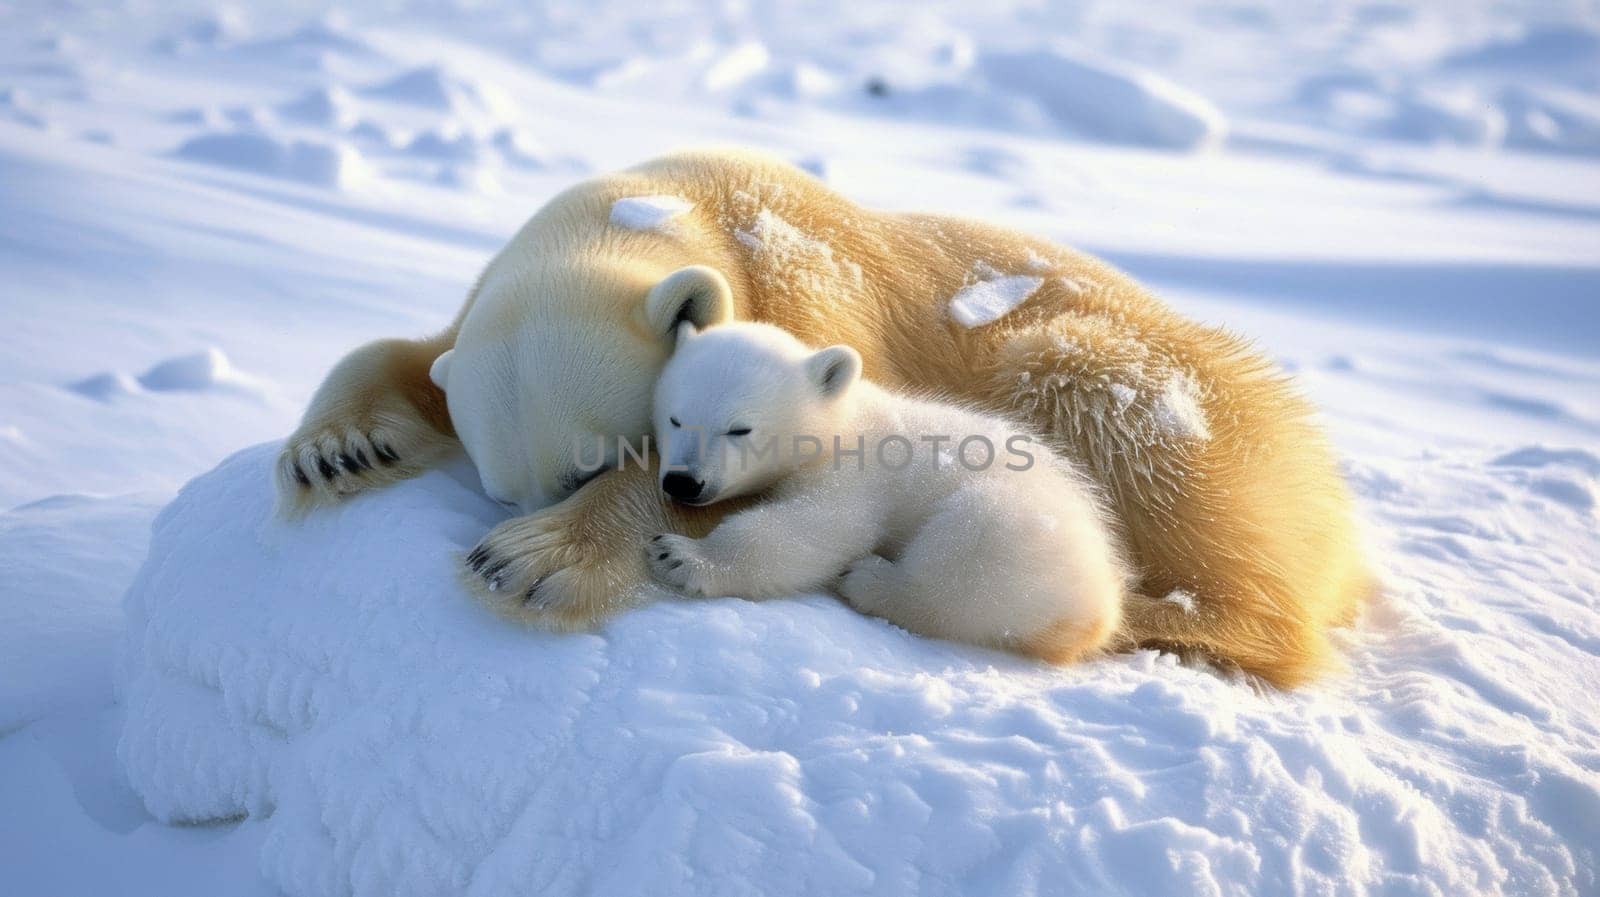 A polar bear and cub sleeping in the snow together